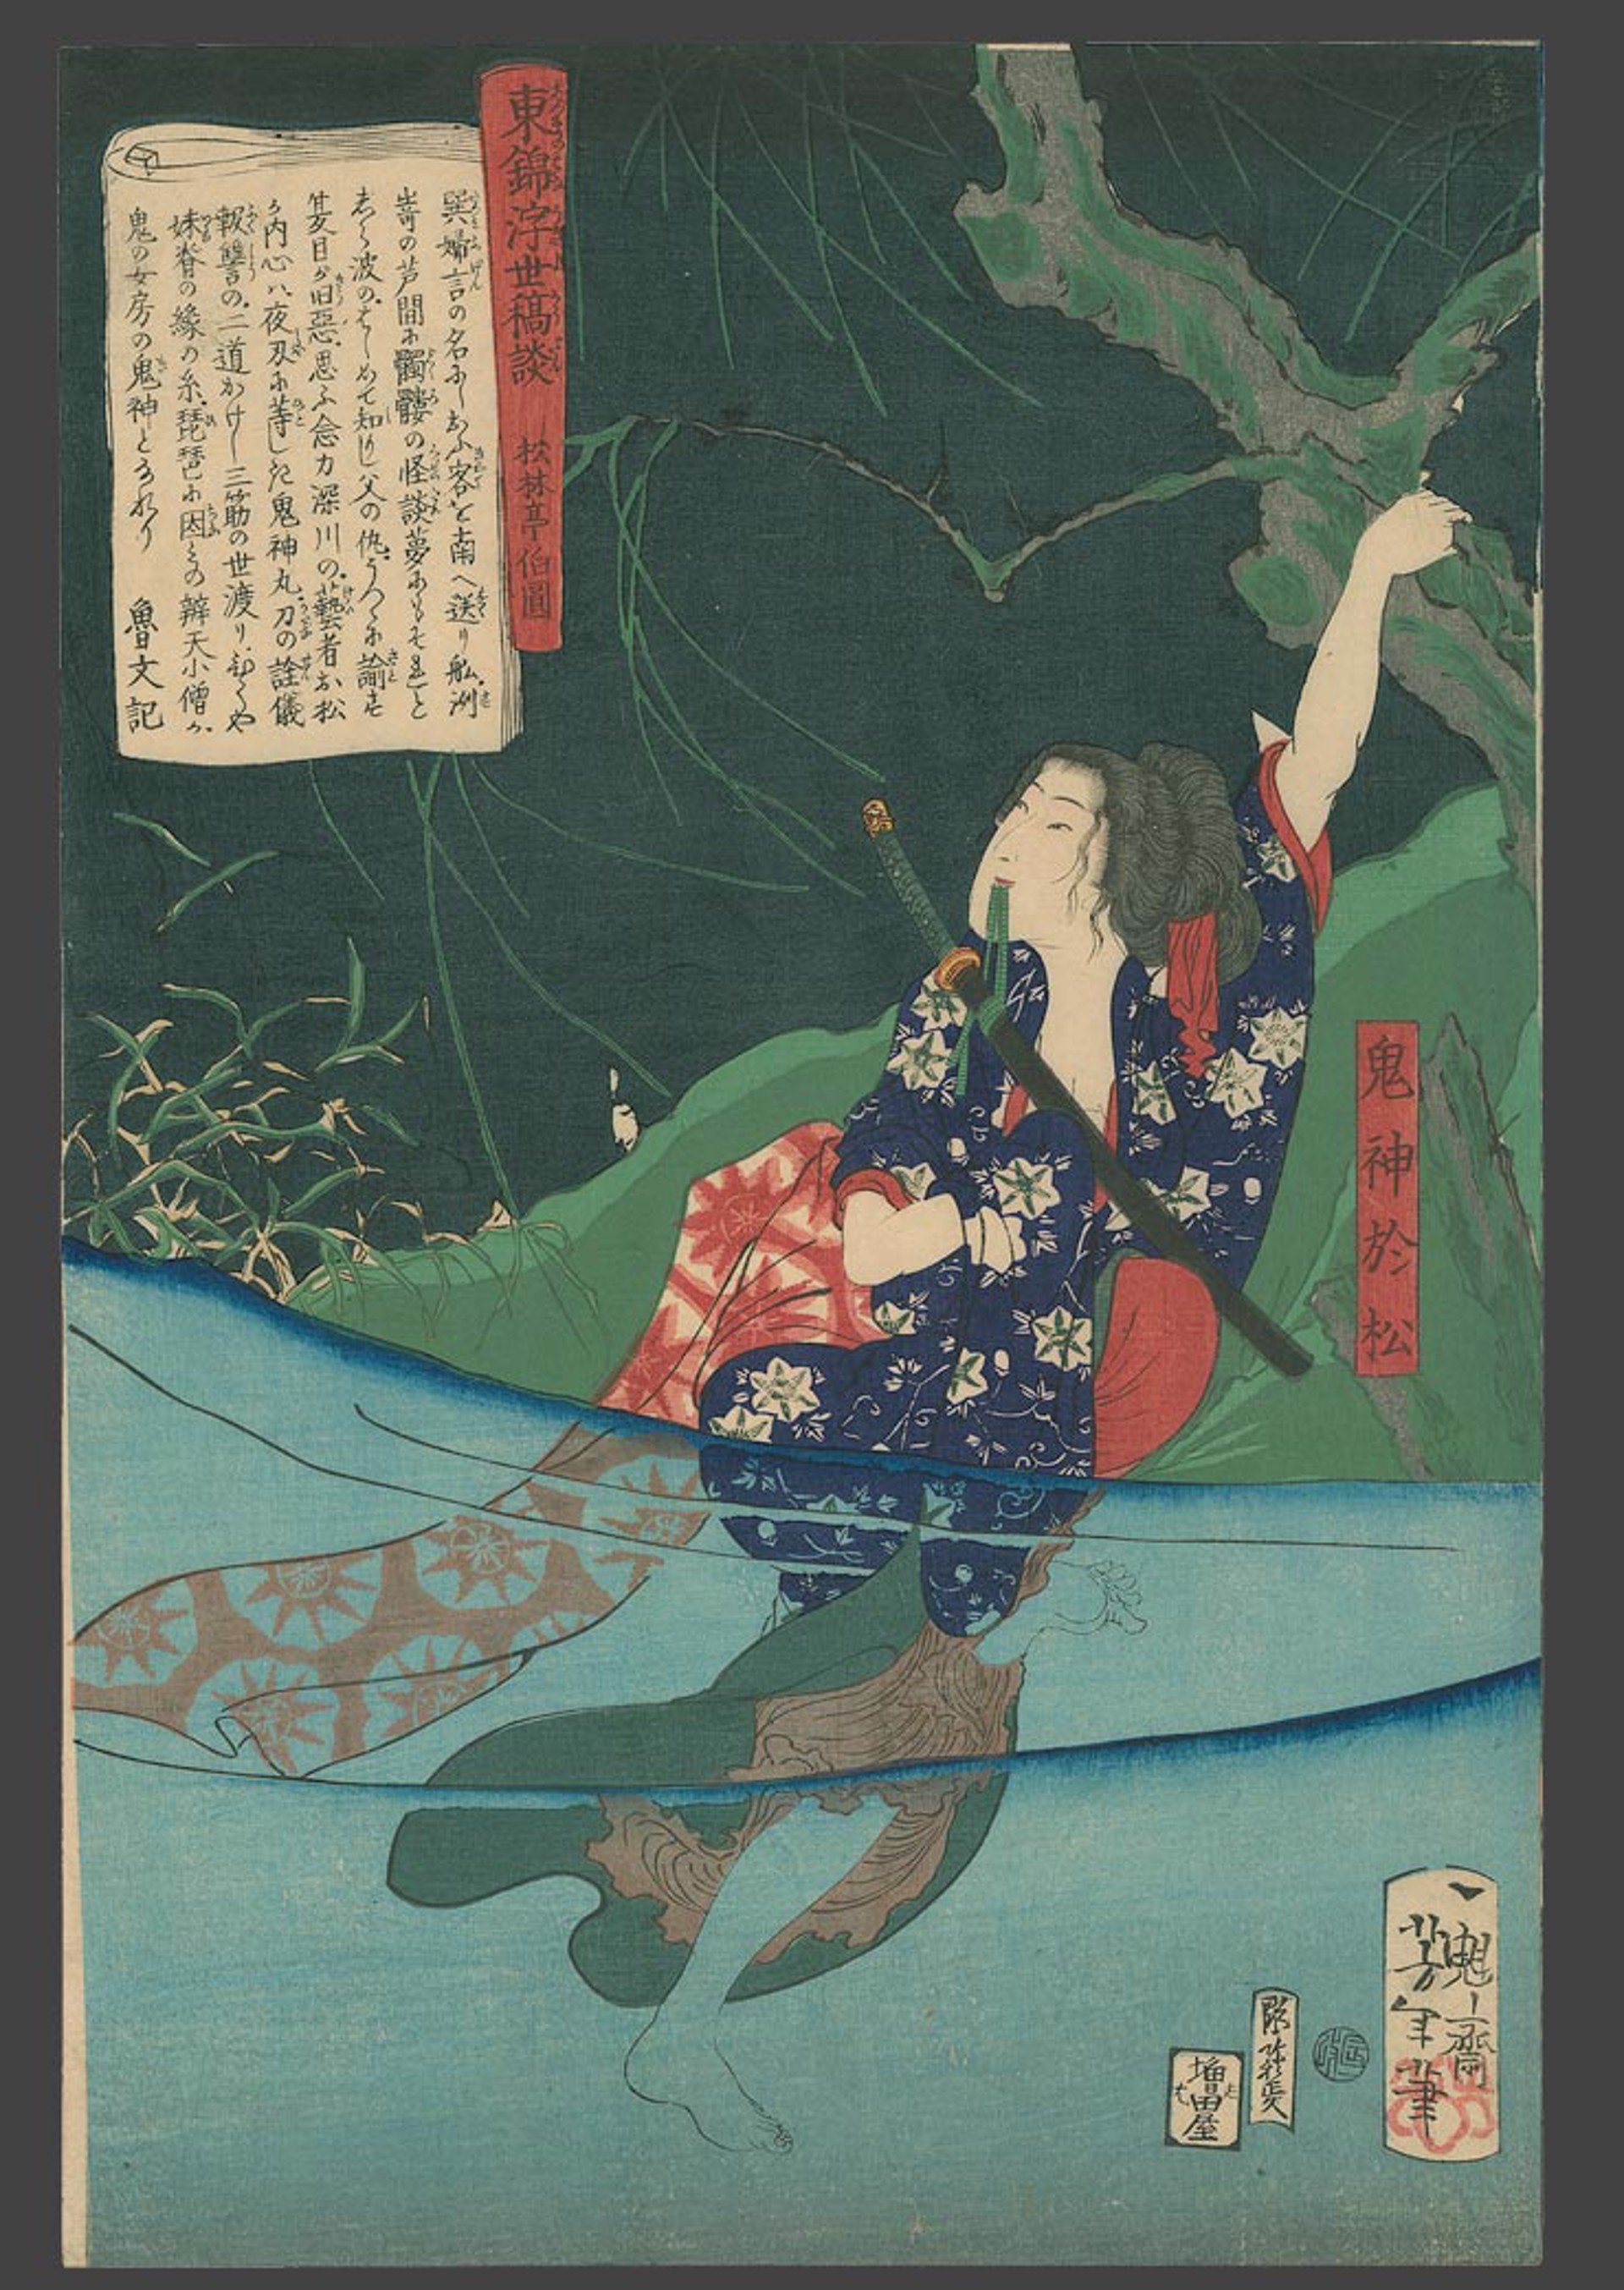 The Demon Omatsu crossing a river Tales of the Floating World on Eastern Brocade by Yoshitoshi